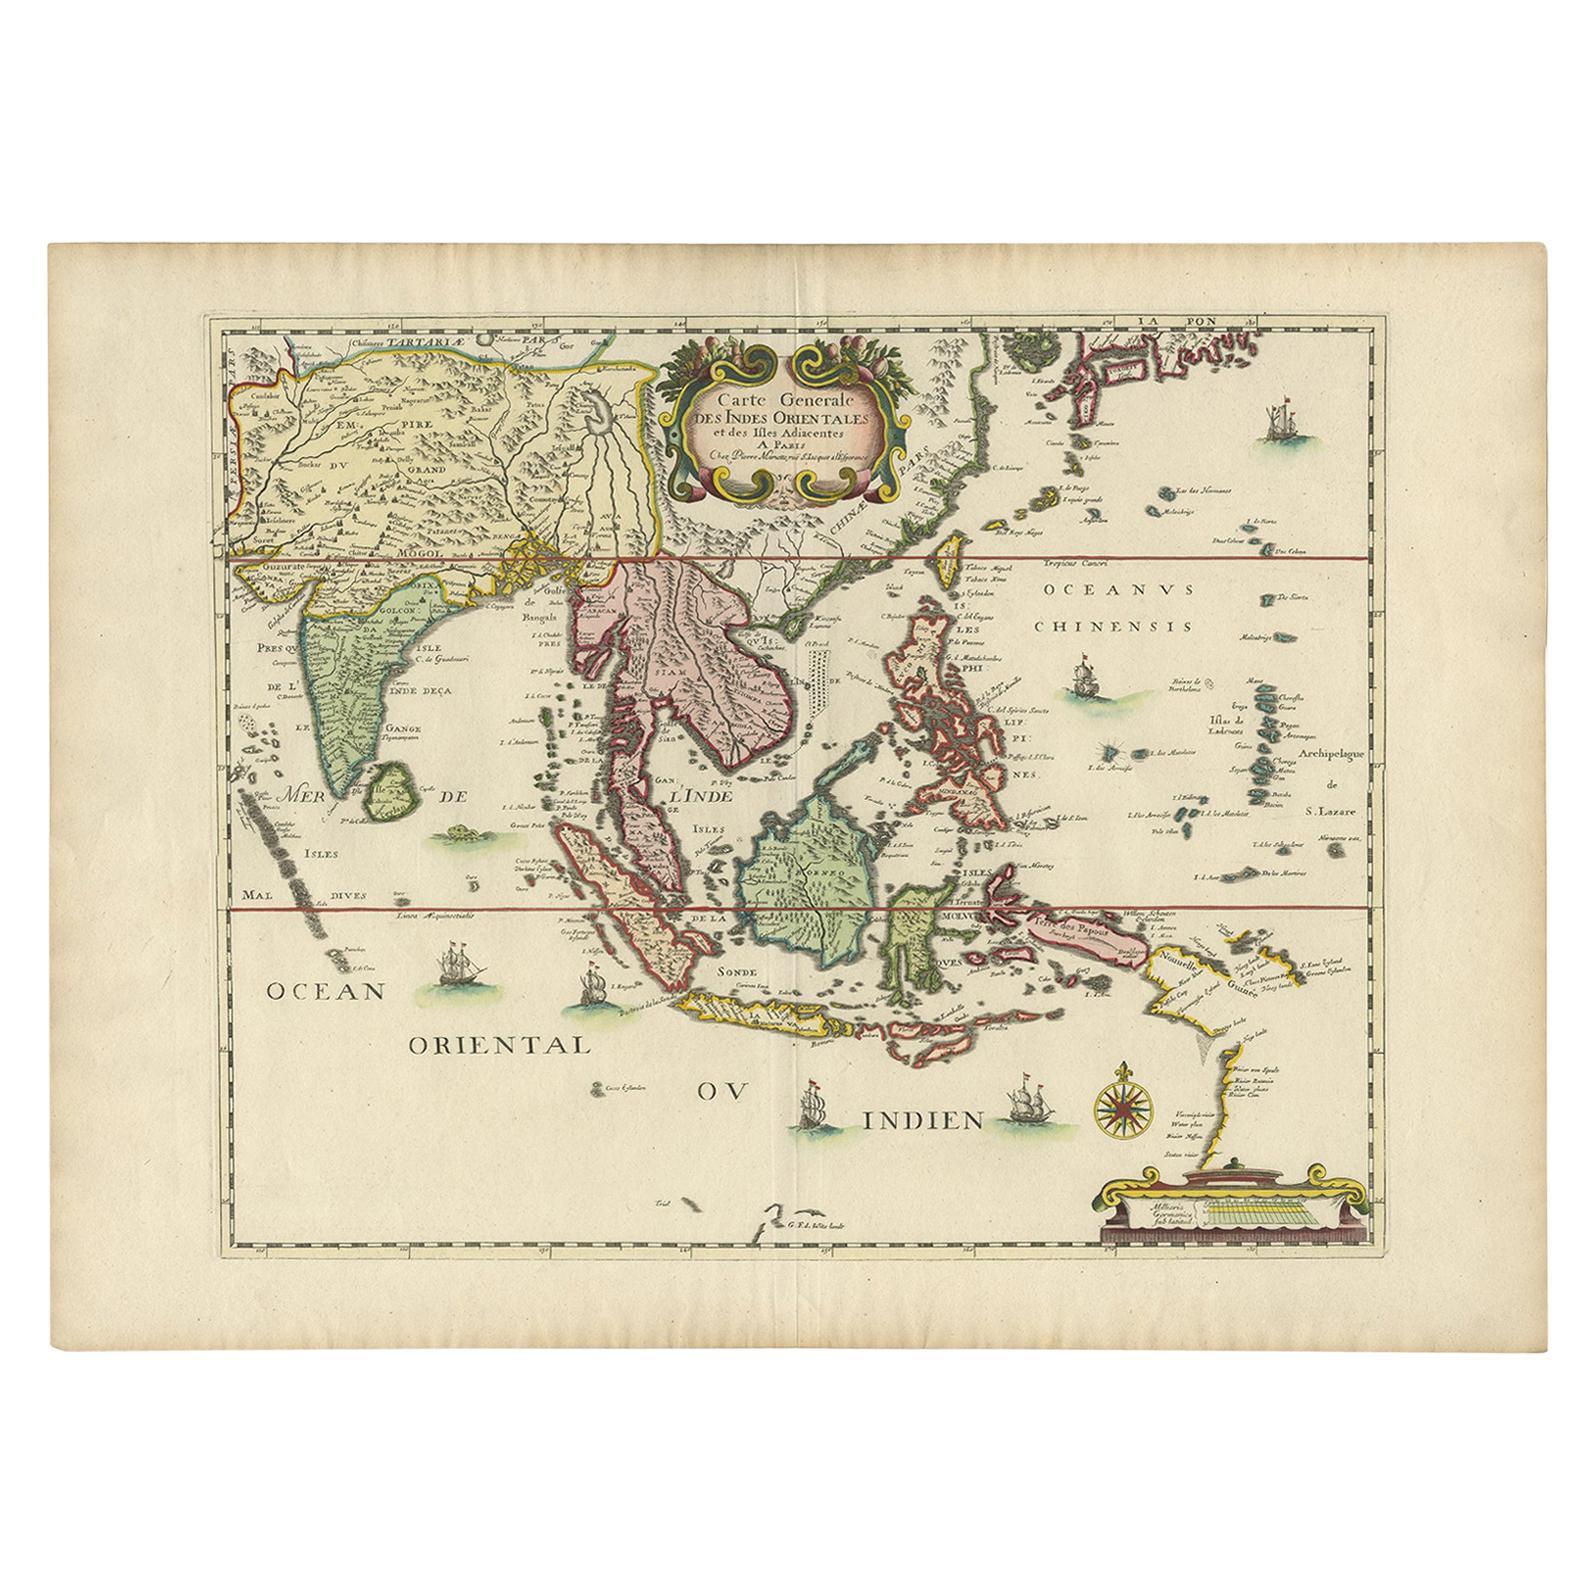 Antique Map of the East Indies by Mariette, circa 1650